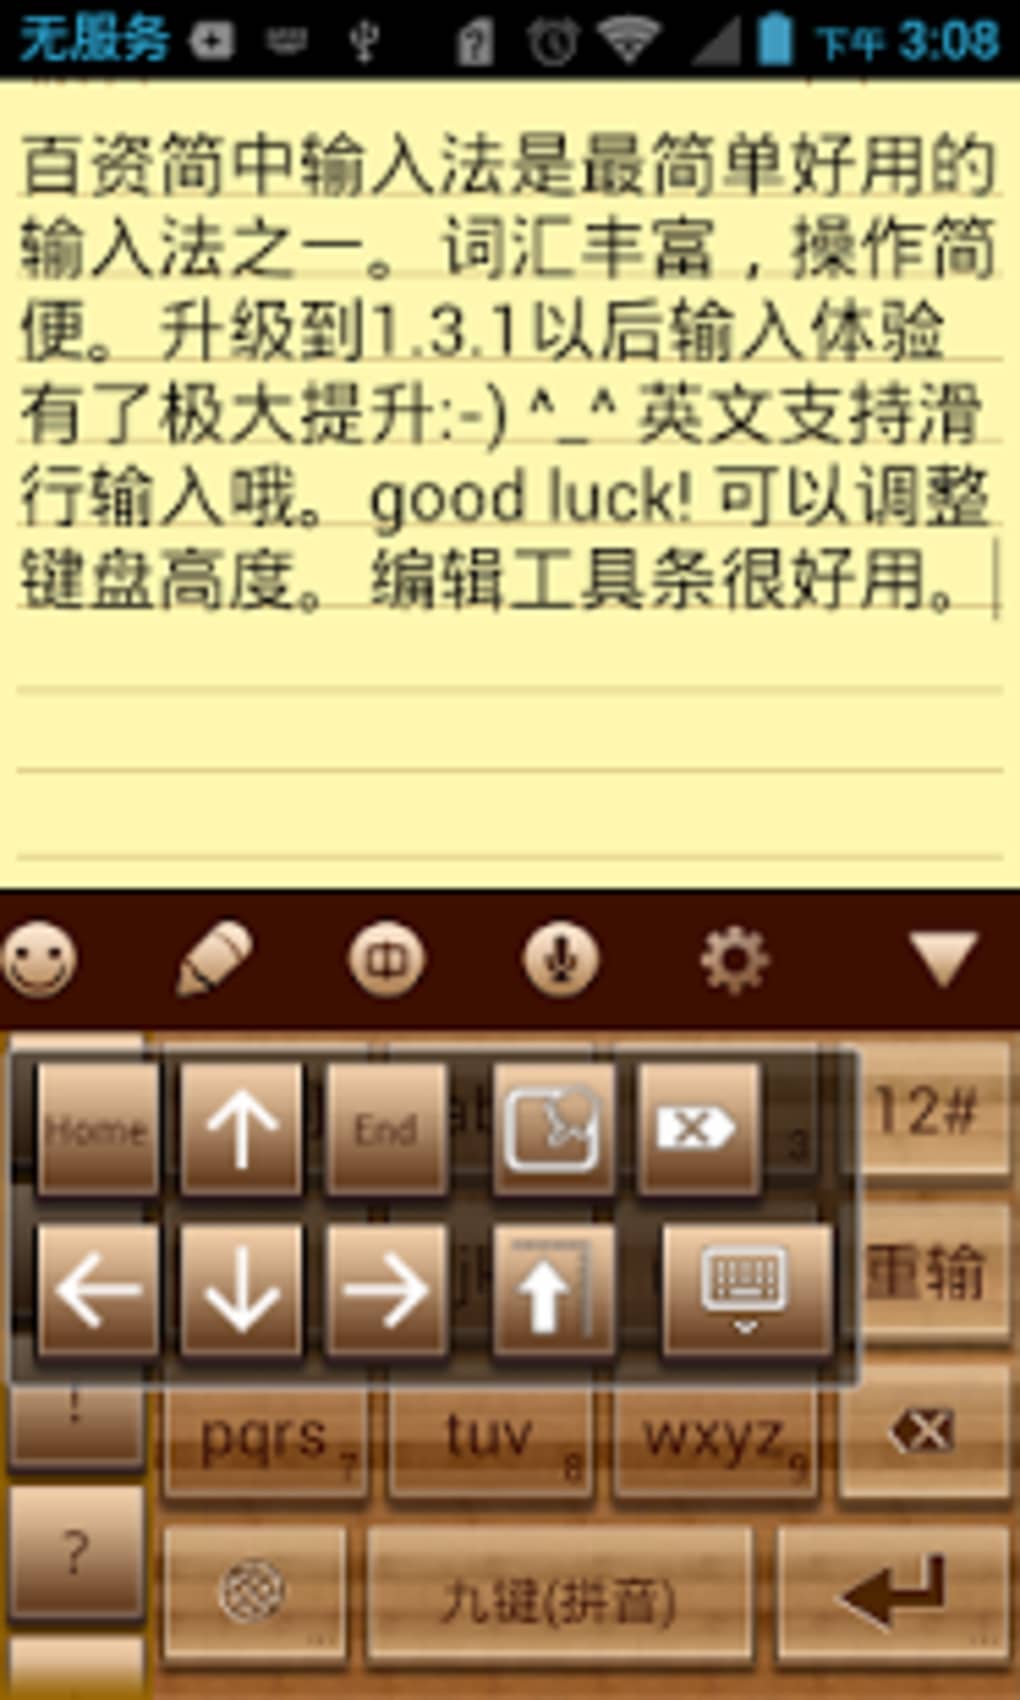 chinese speech to text software